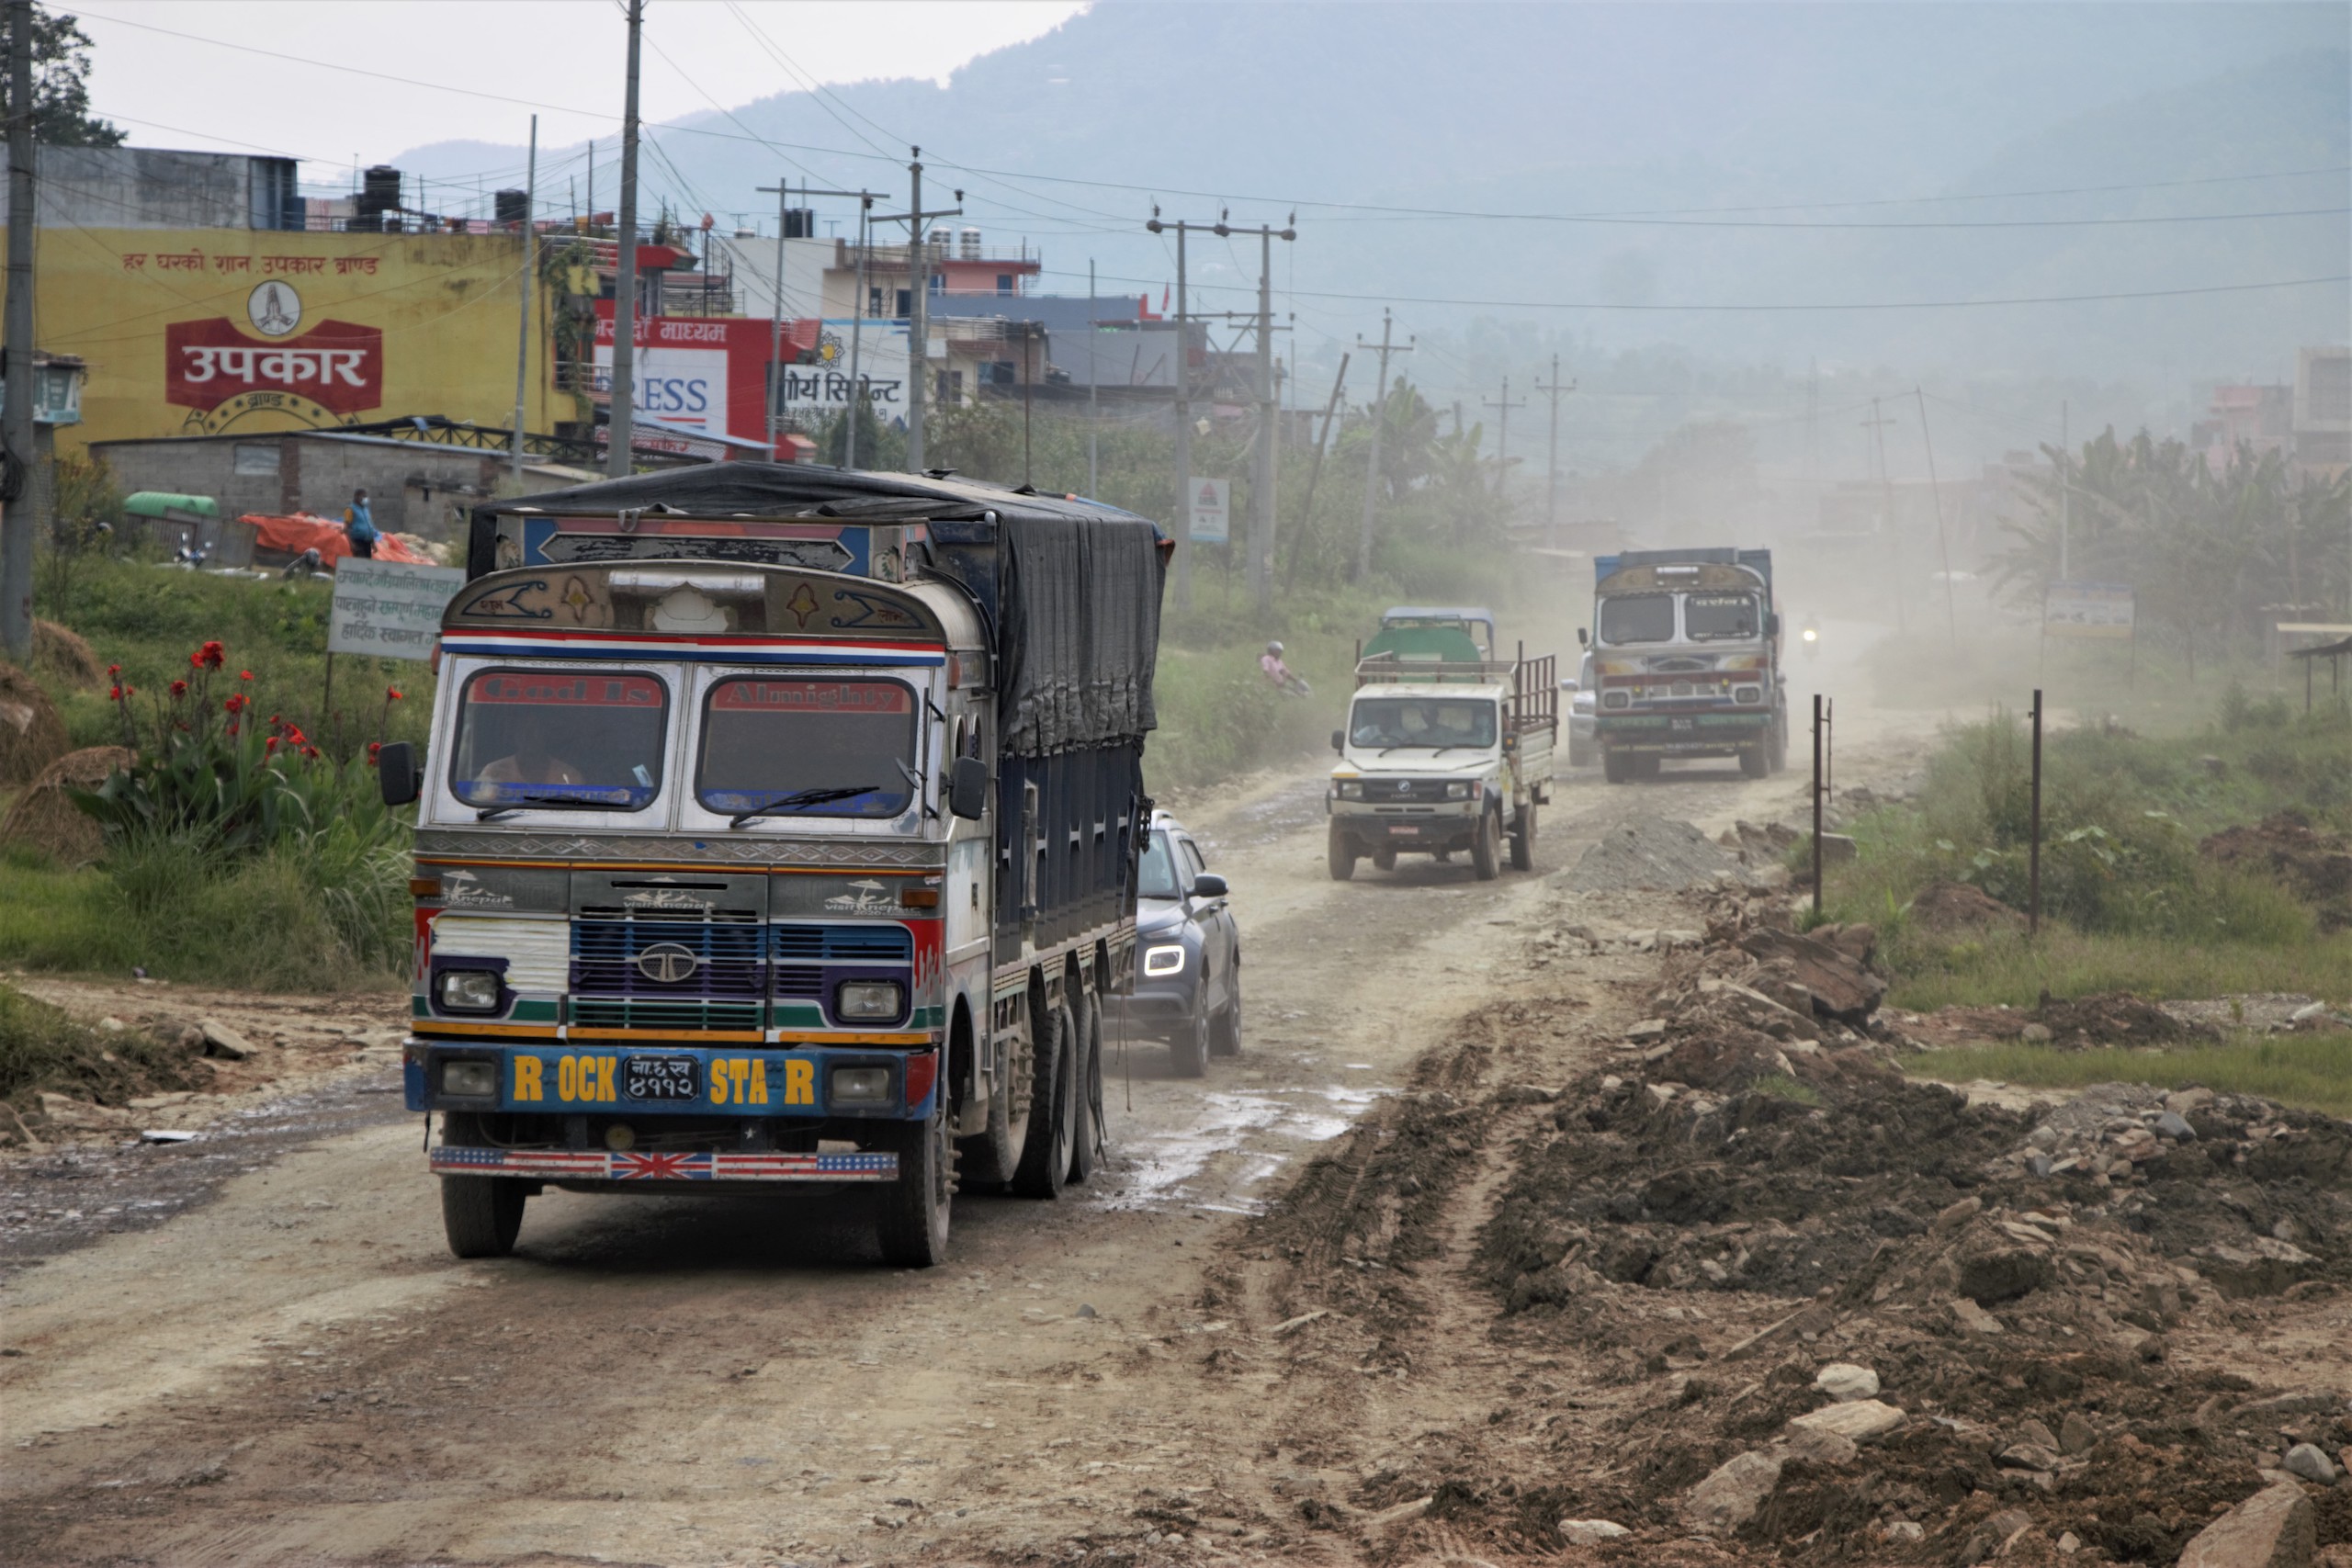 Vehicles on the Pokhara-Mugling Highway in western Nepal. Widening of the road has resulted in severe dust pollution for residents living along the road.